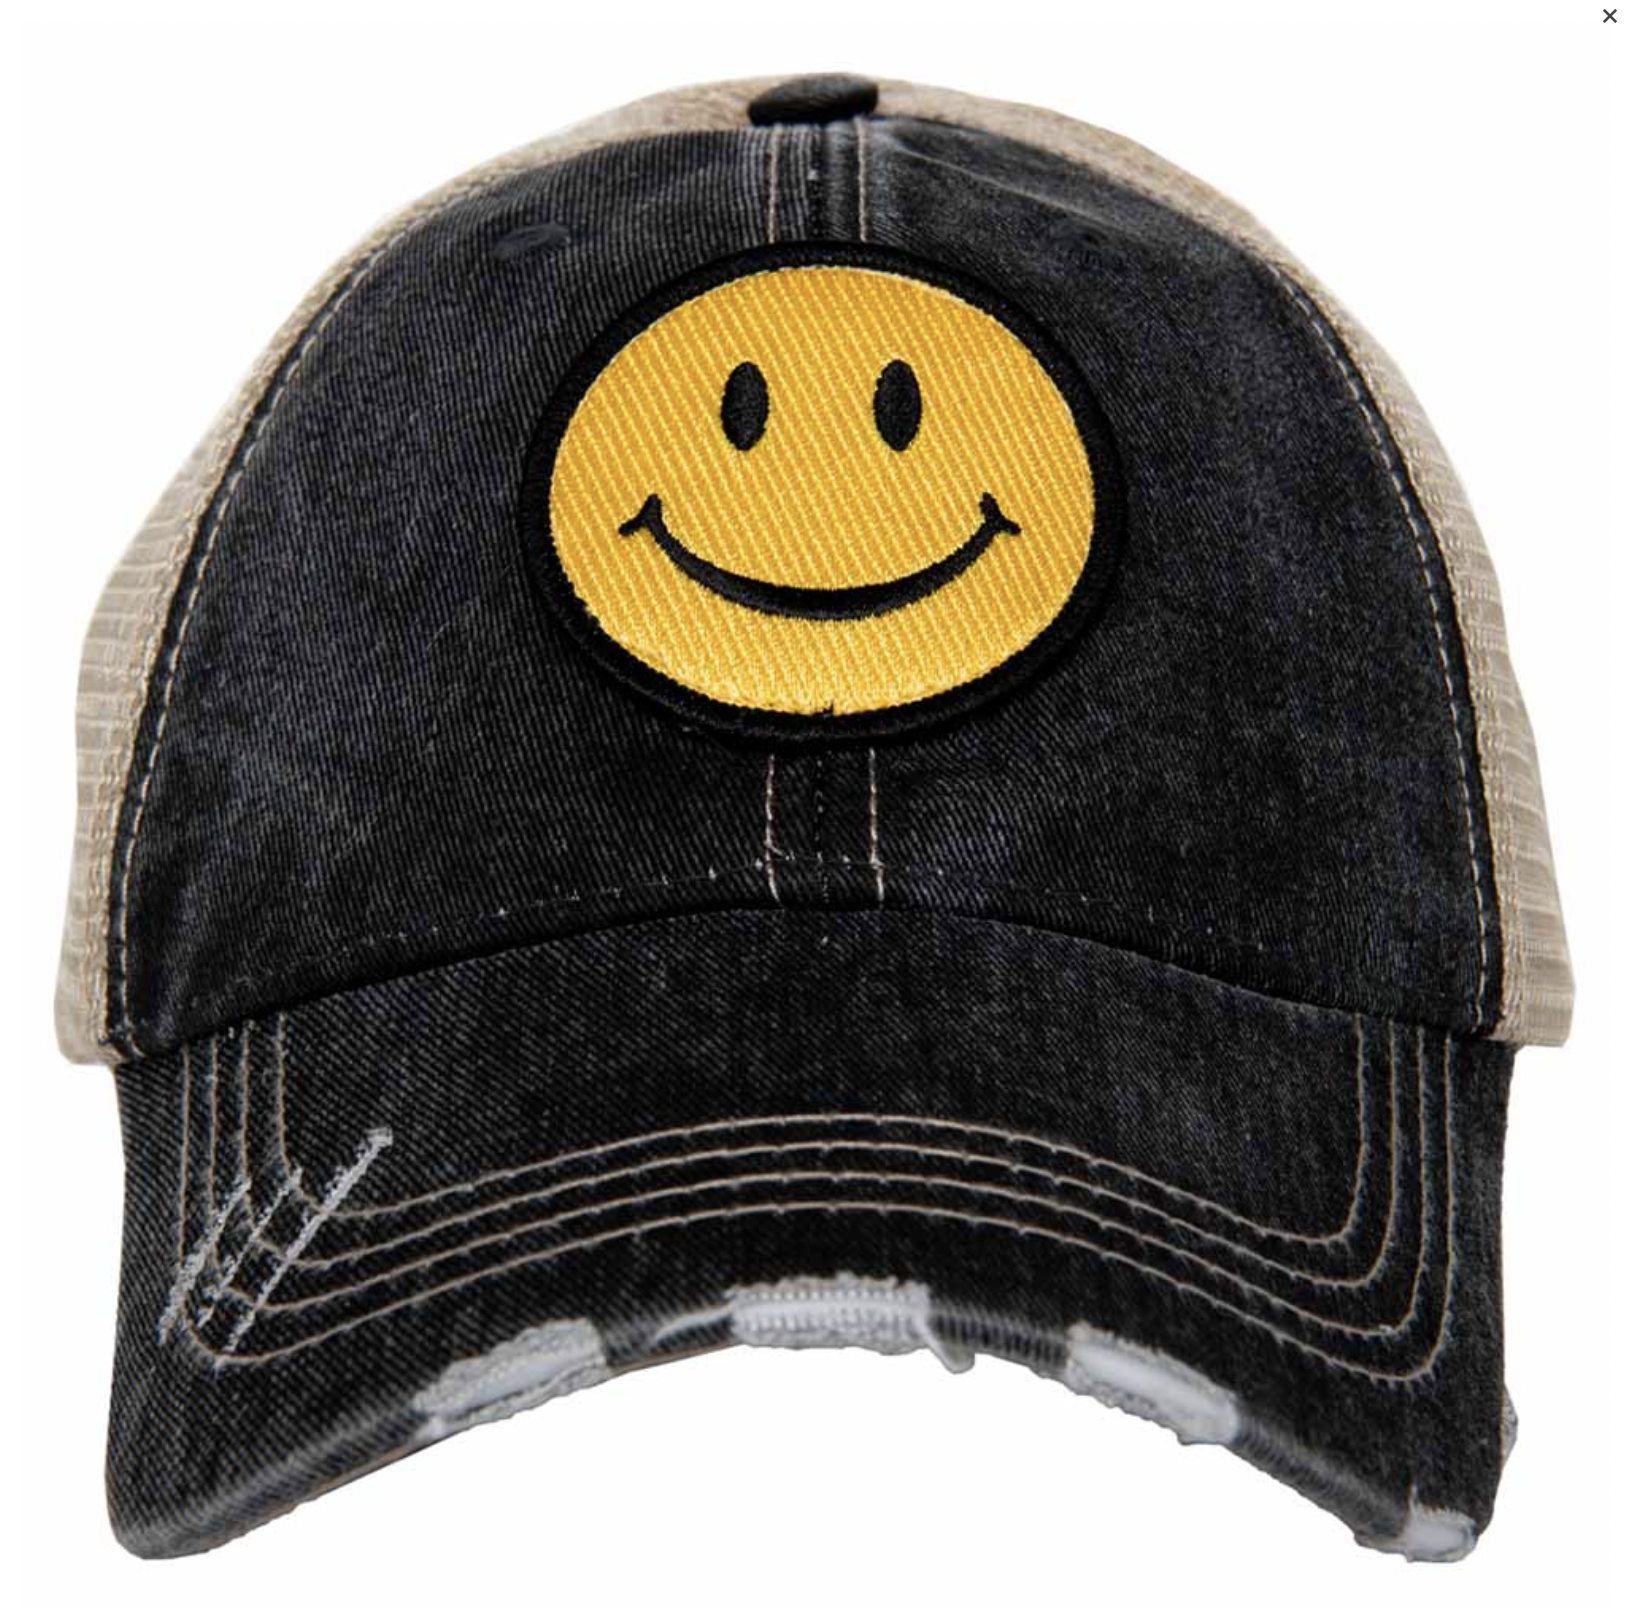 KATYDID COLLECTION SMILEY FACE TRUCKER HAT- BLACK/YELLOW